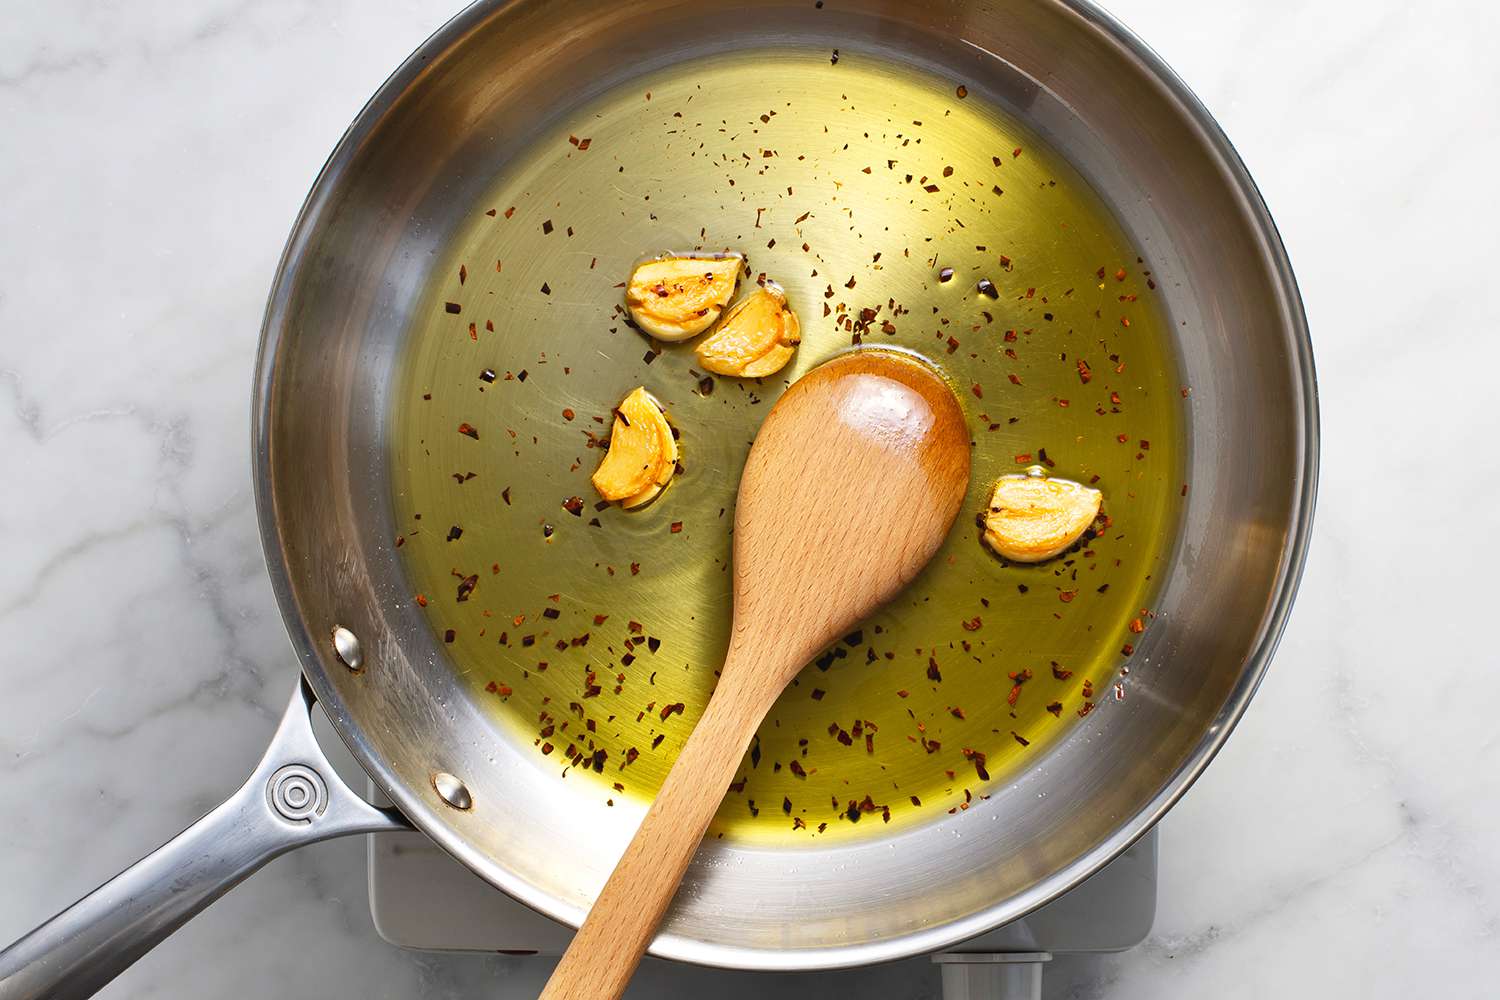 Garlic, oil and red pepper flakes in a pan with a wooden spoon, on a burner 